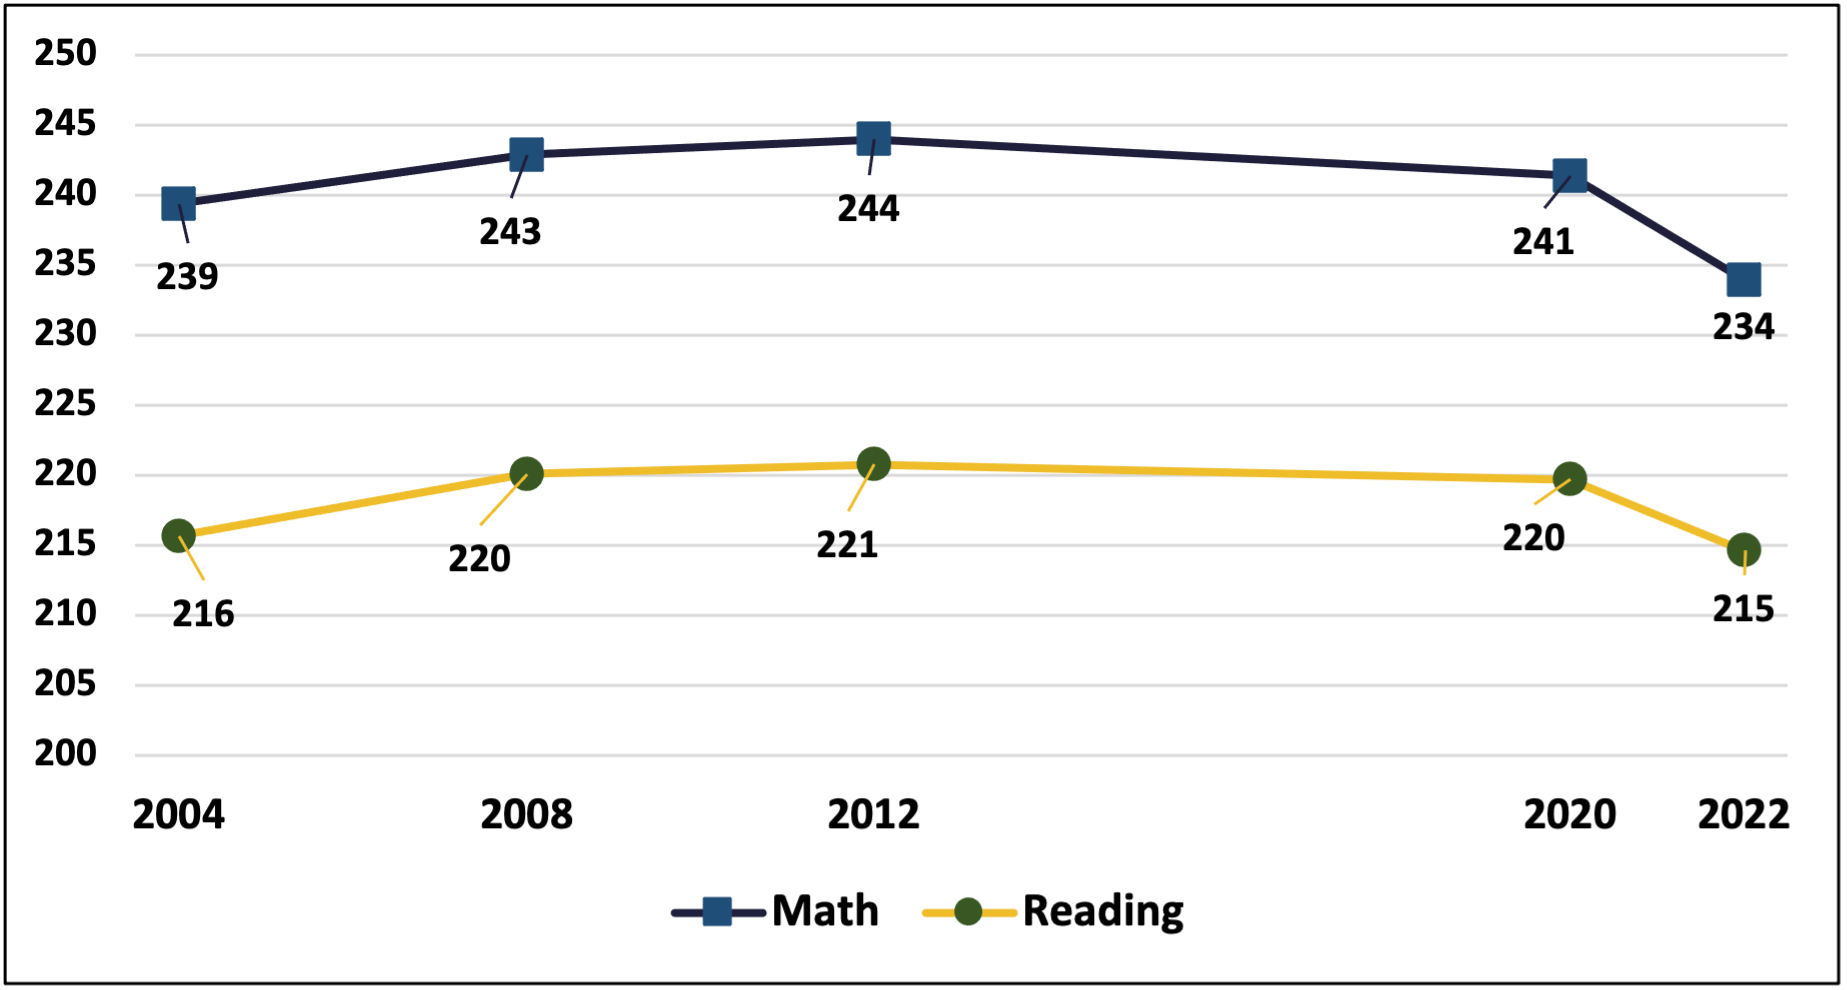 NAEP scores in math and reading increase leading up to pandemic, then decline sharply between 2020 and 2022